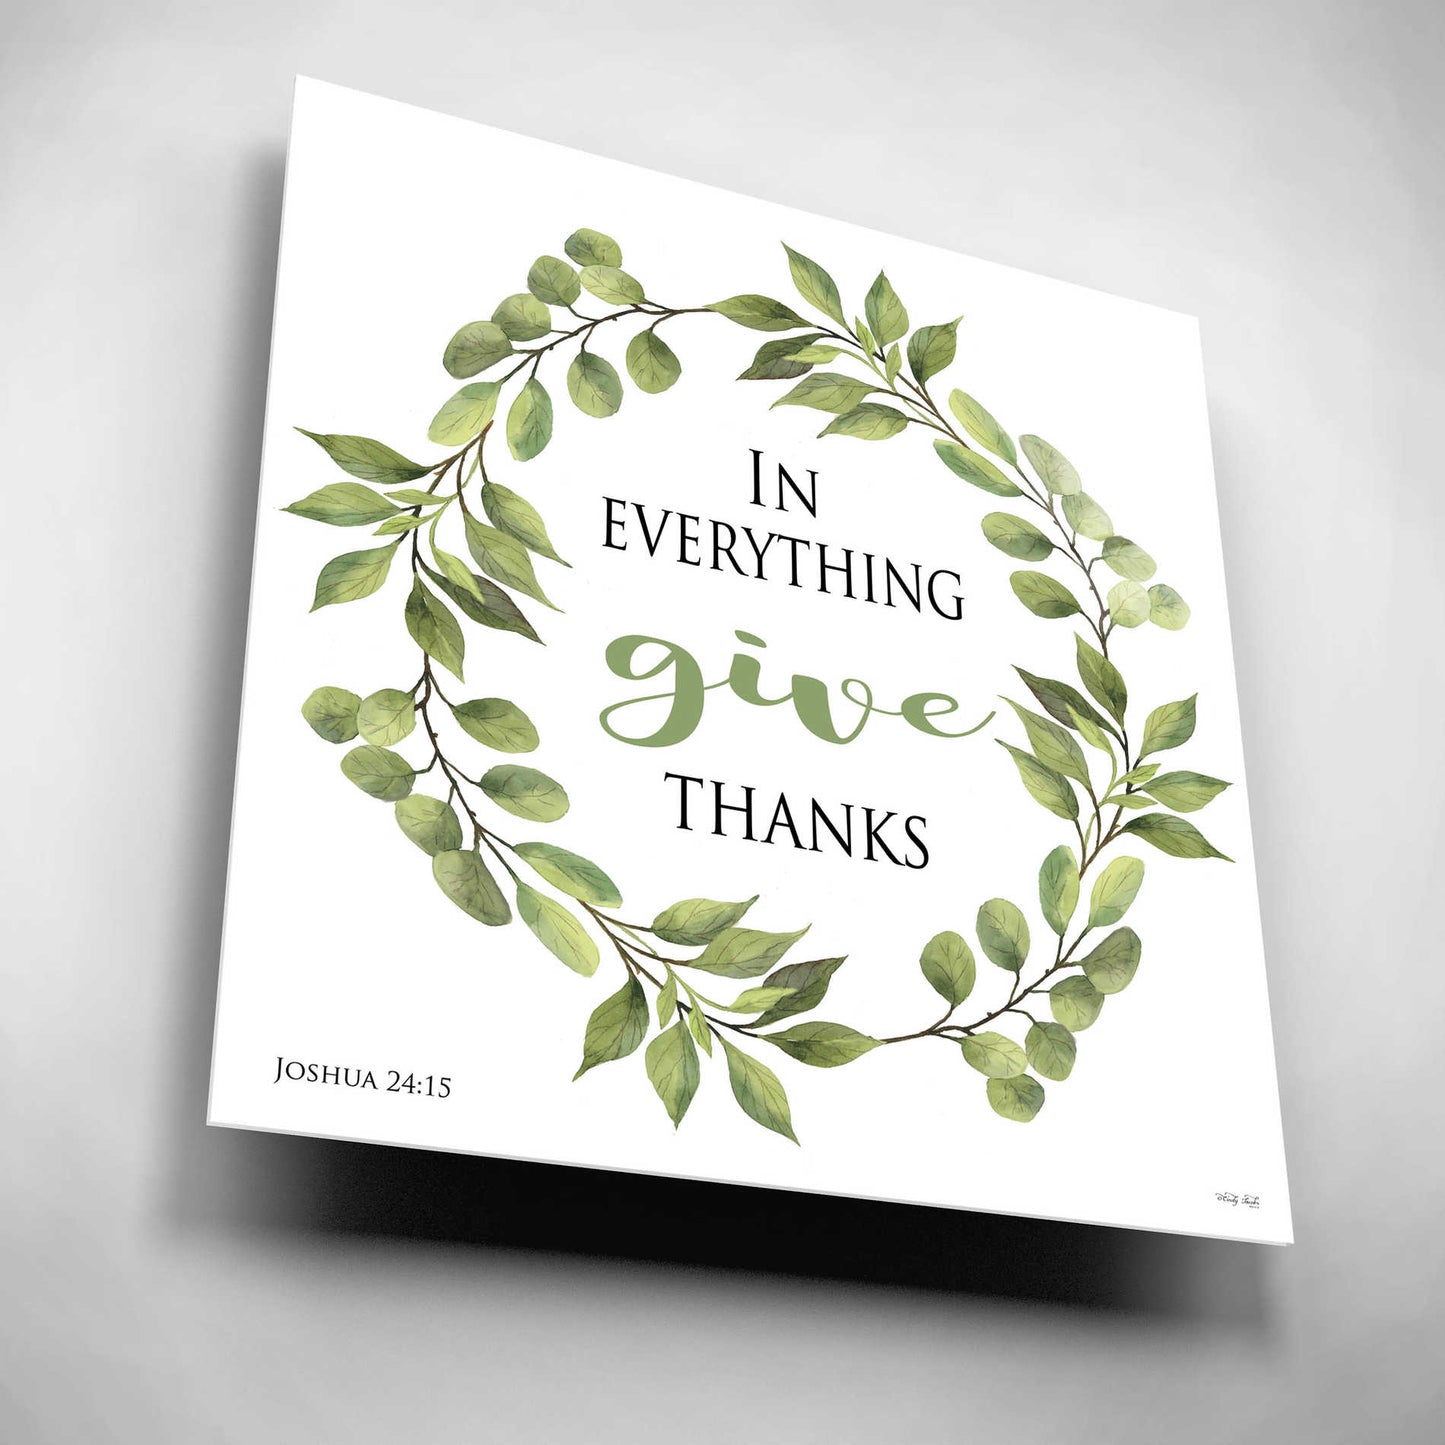 Epic Art 'In Everything Give Thanks Wreath' by Cindy Jacobs, Acrylic Glass Wall Art,12x12